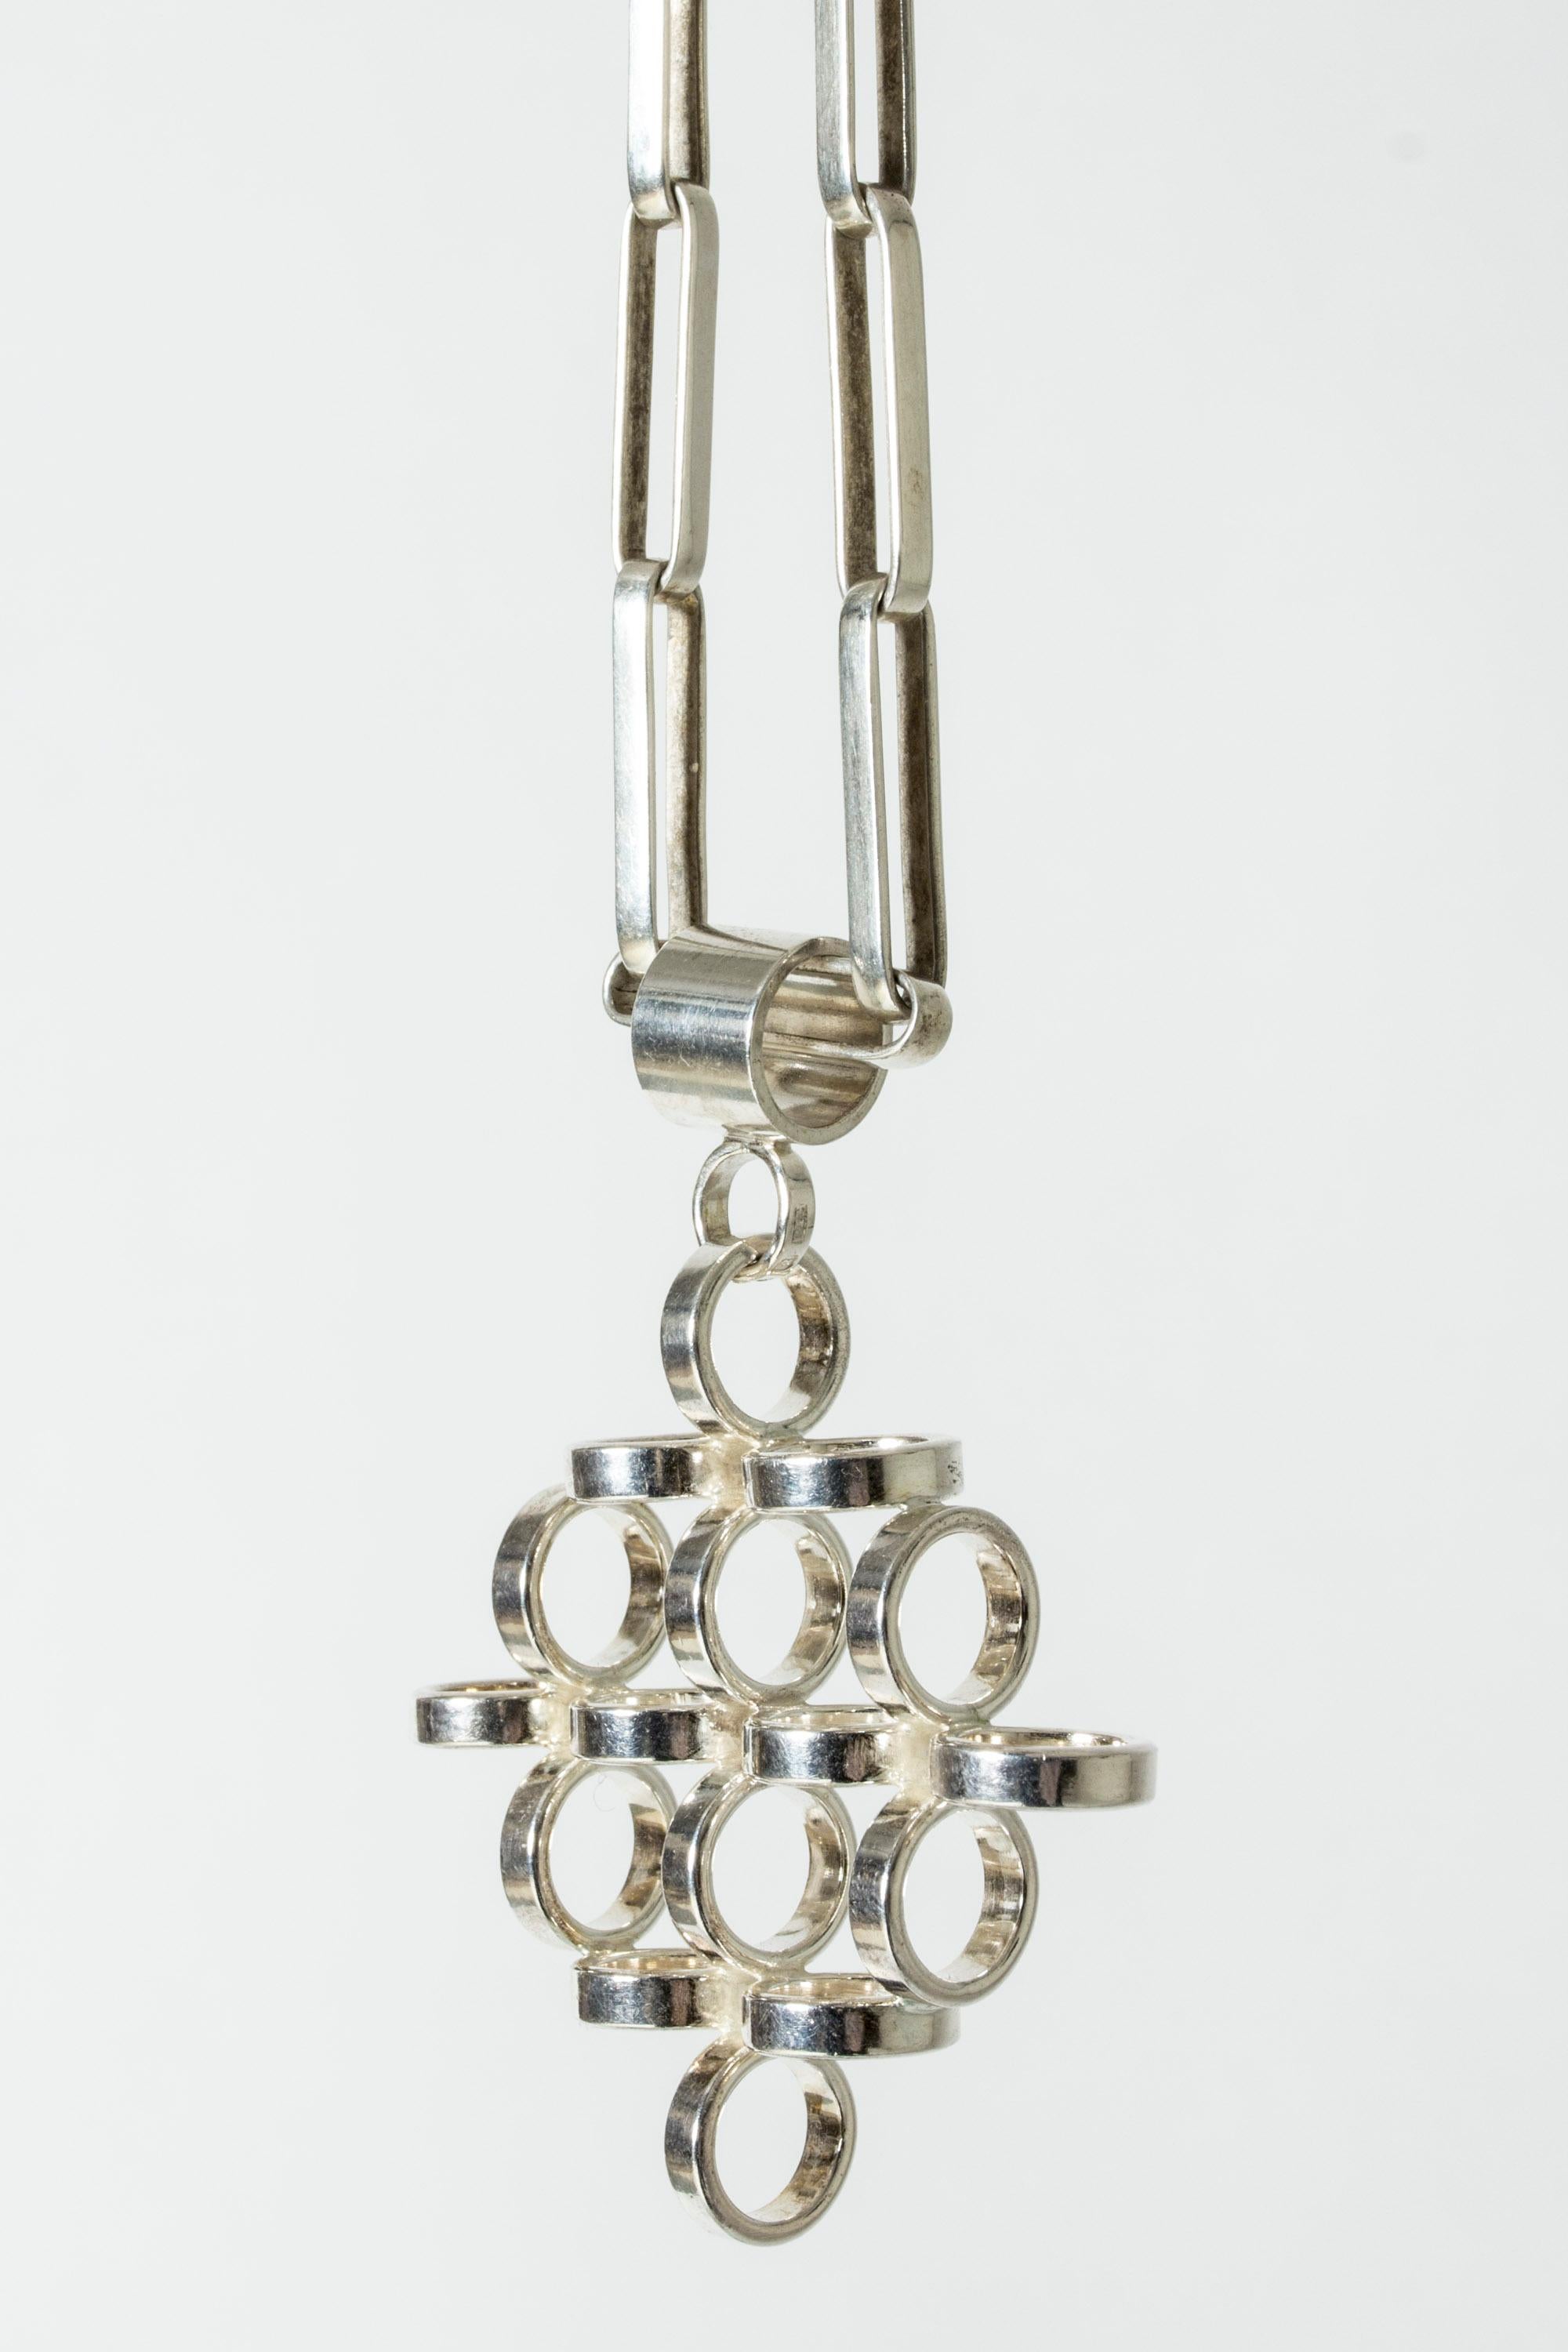 Vintage Scandinavian silver pendant and chain by Cecilia Johansson, 1958 + 1976 In Good Condition For Sale In Stockholm, SE